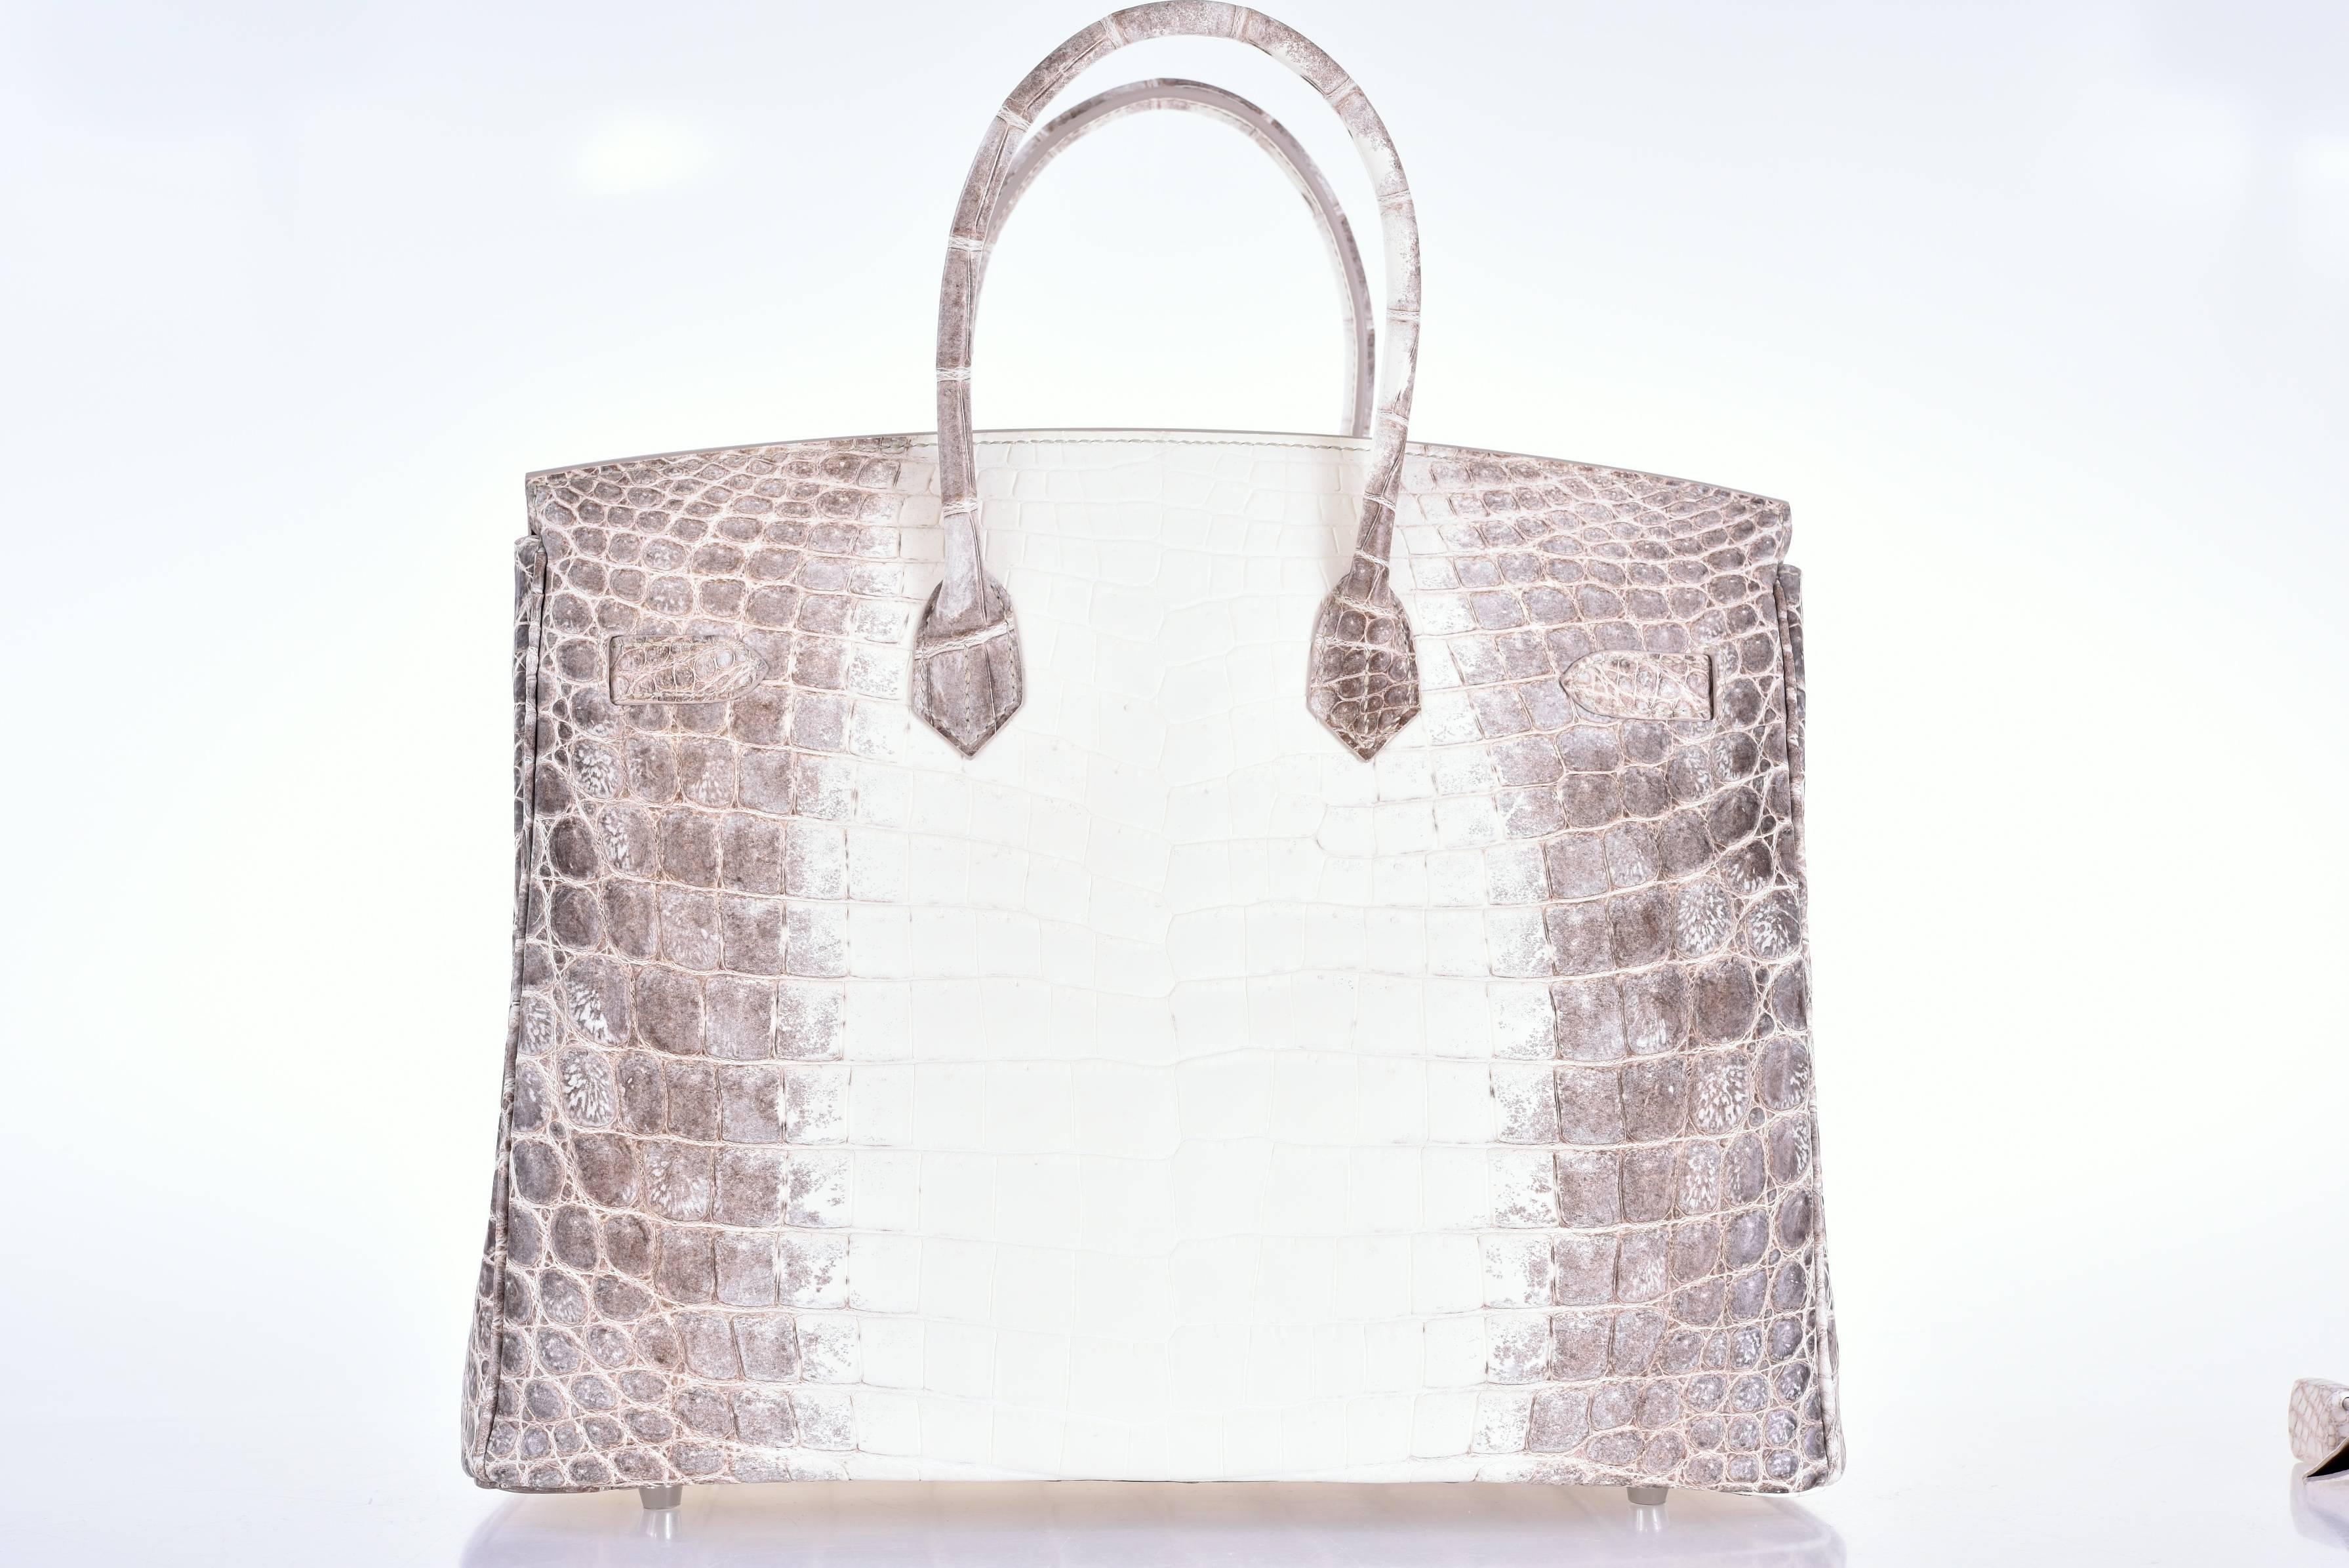 Hermes Himalayan Nilo crocodile 35cm Birkin Bag Limited Edition JaneFinds In New Condition For Sale In NYC Tri-State/Miami, NY